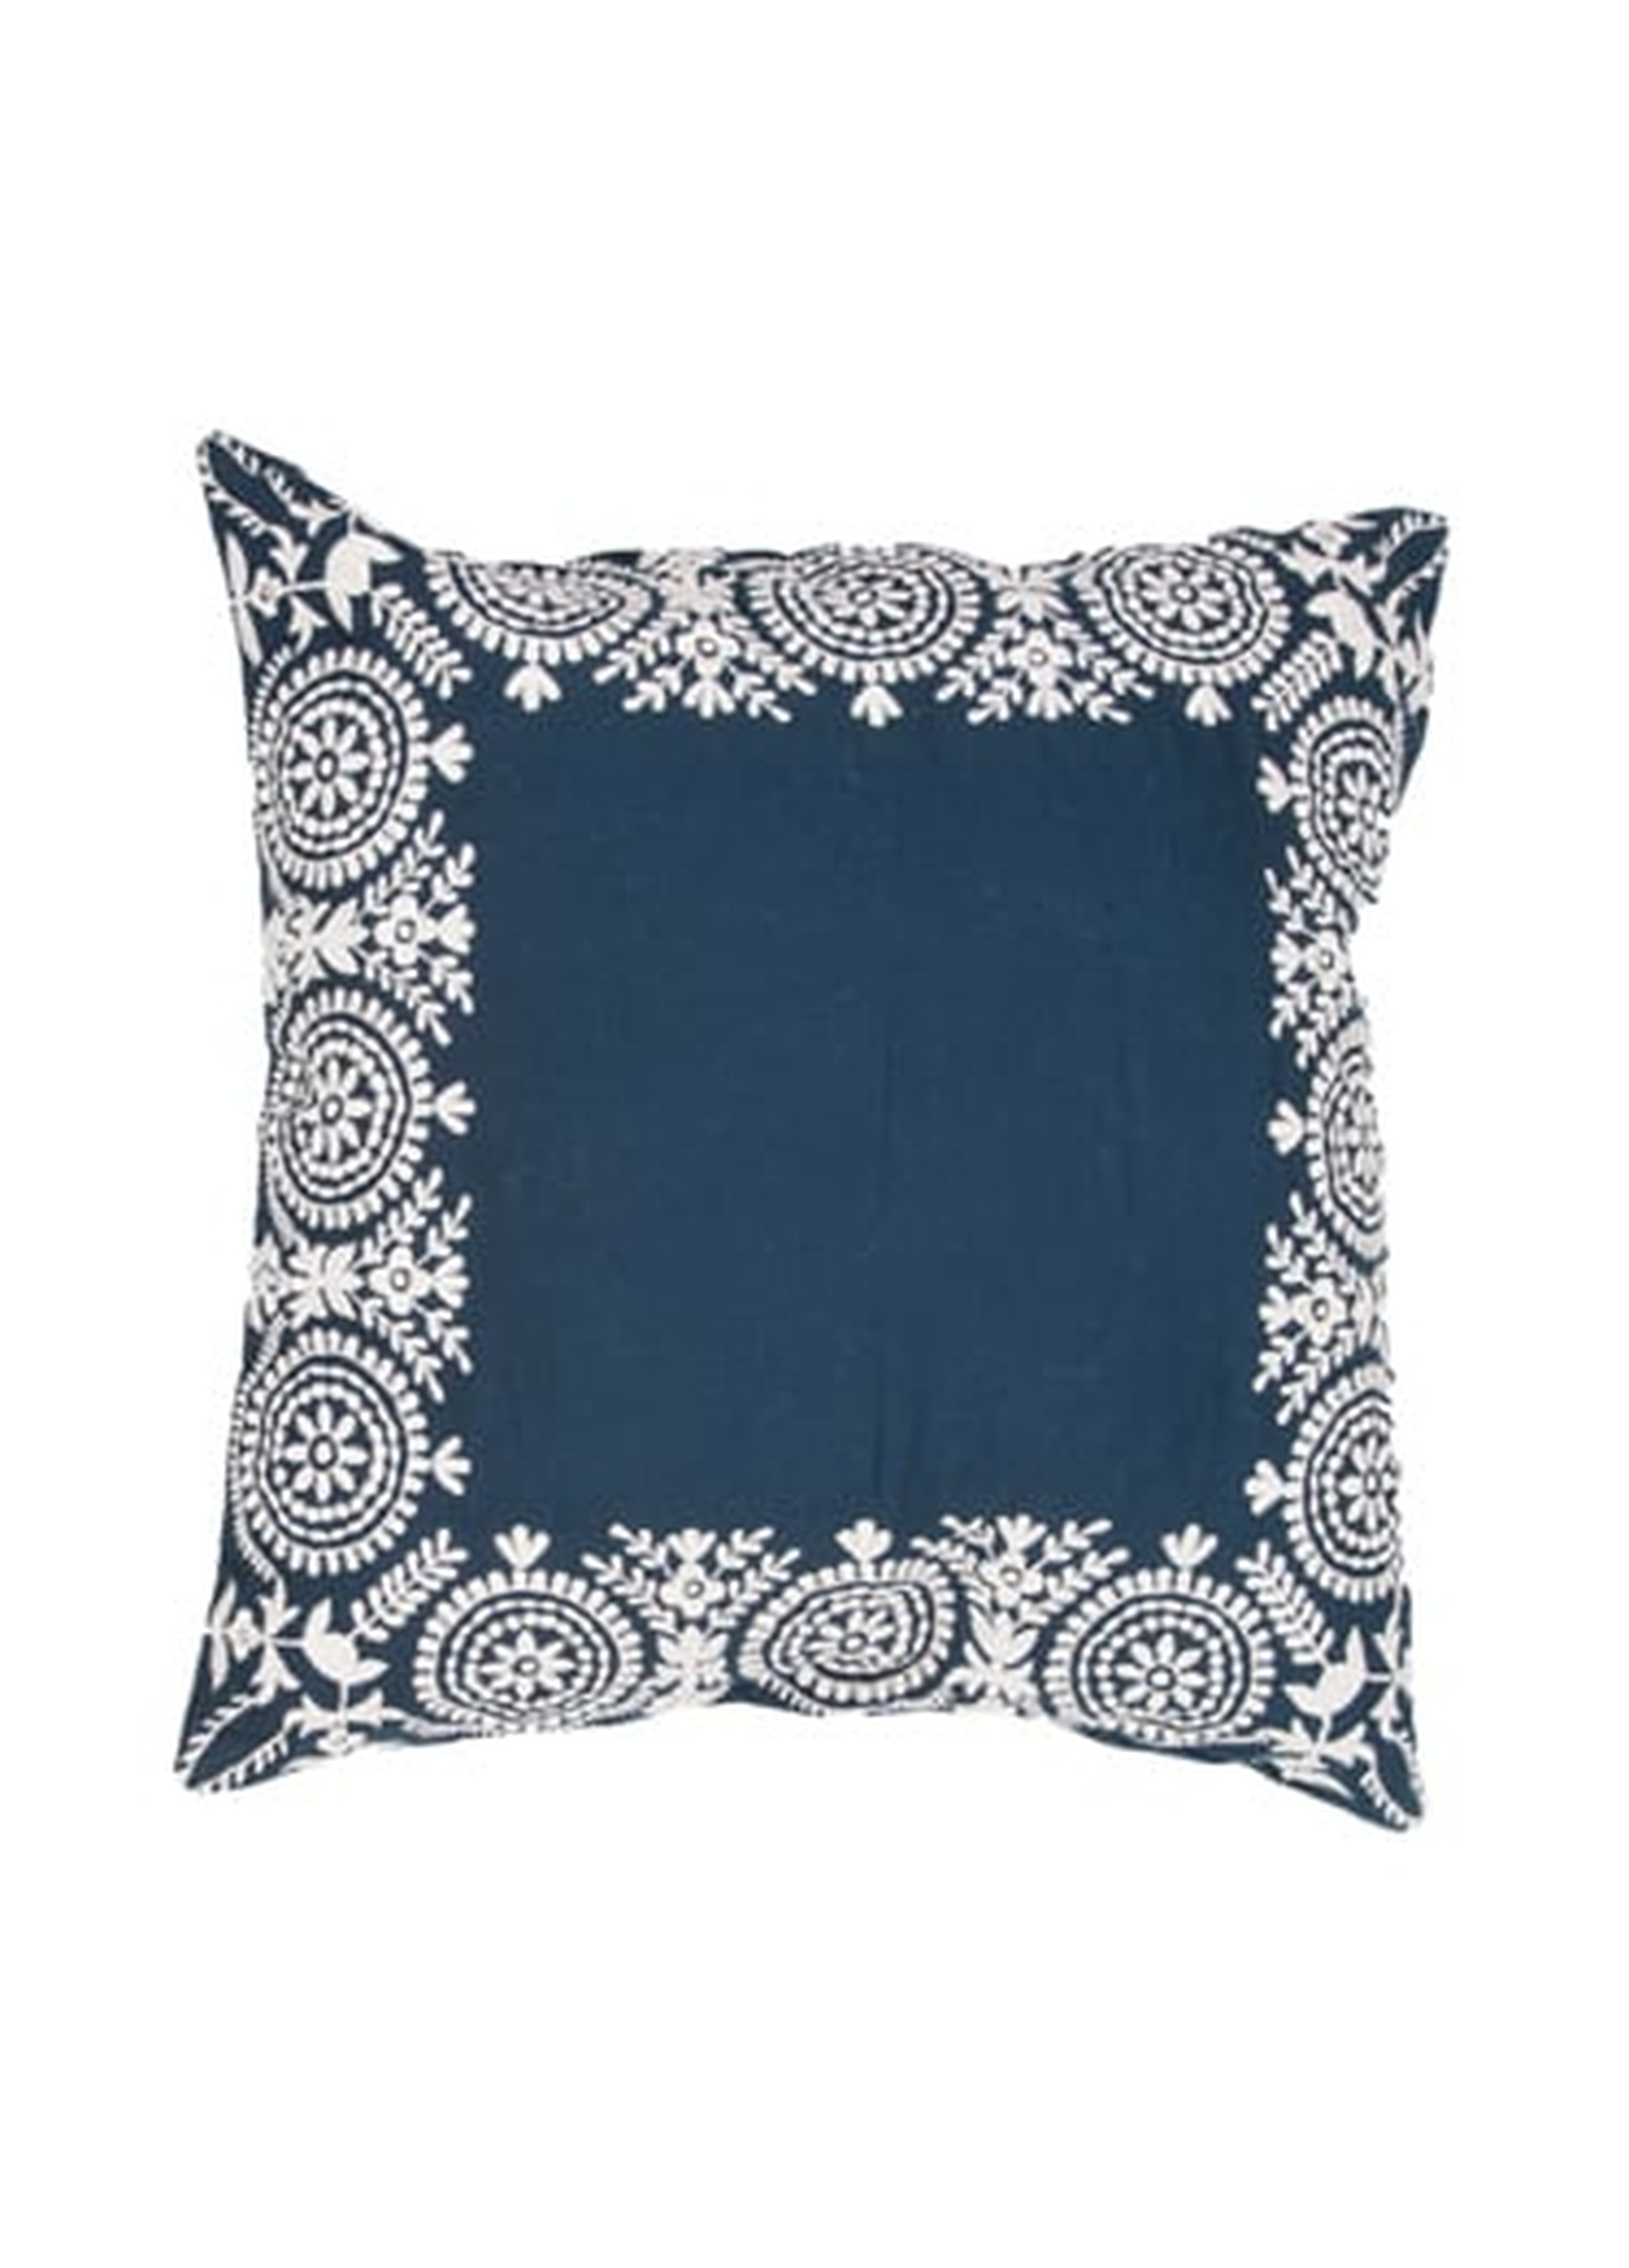 MNP18 - Traditions Made Modern Pillows, Blue, White - 18"x18" - poly Fill - Collective Weavers